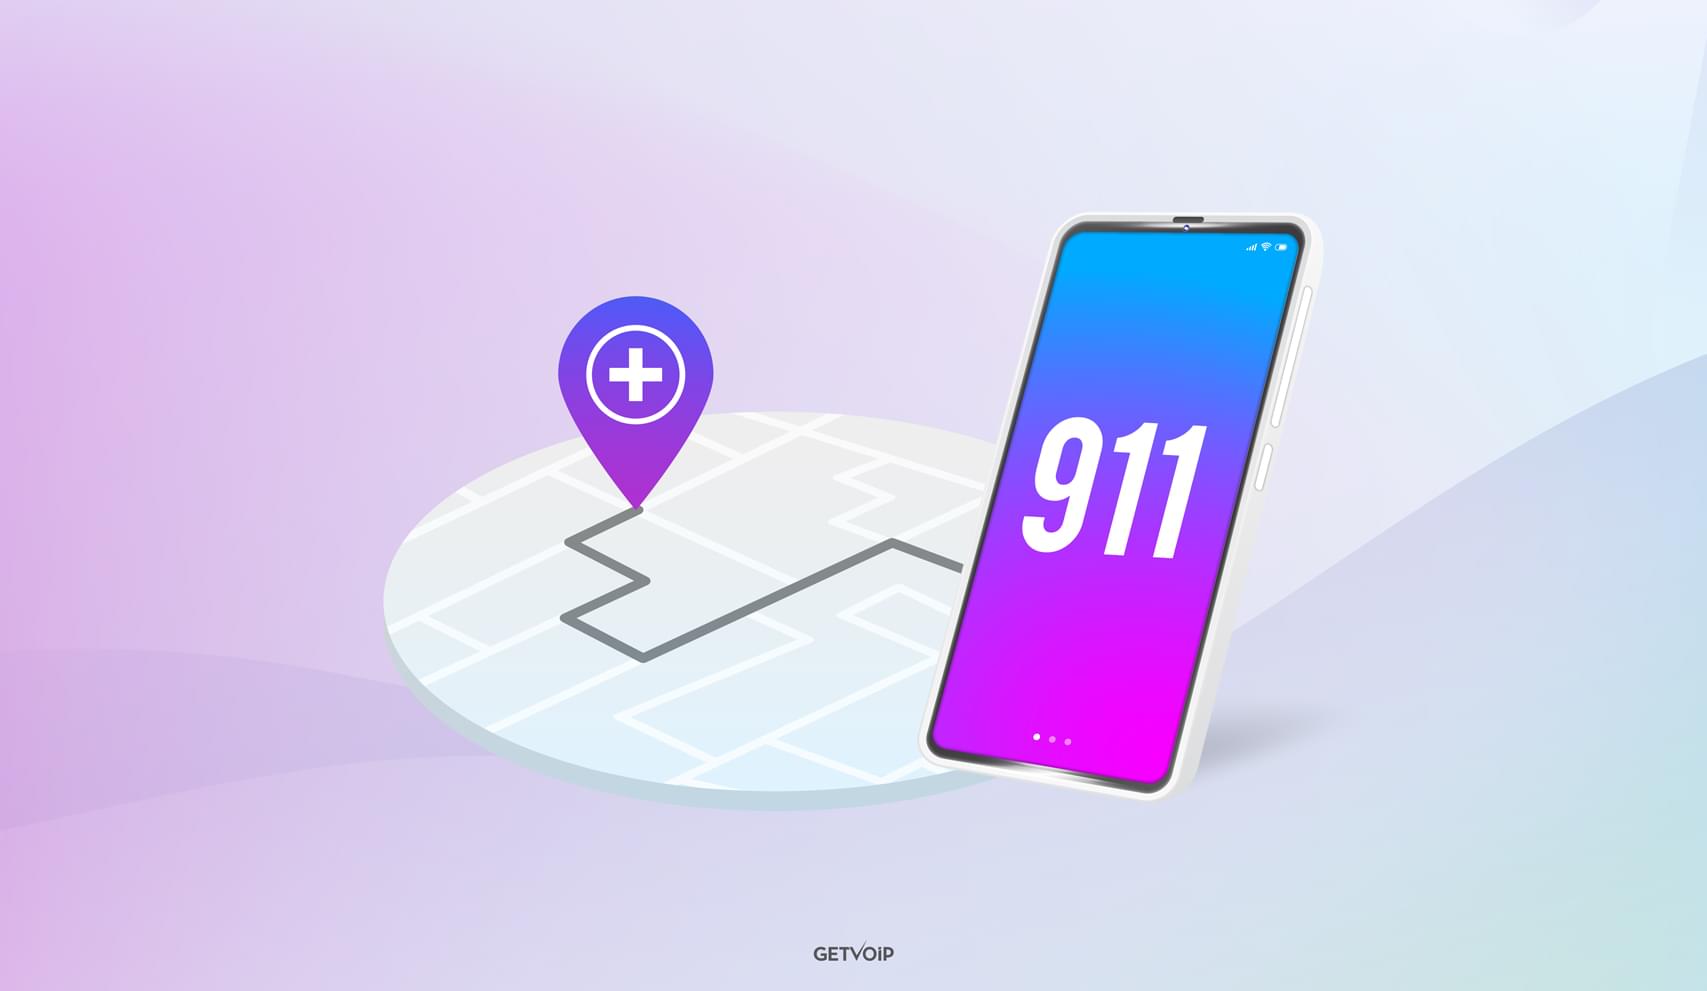 Hacking E911: track any cellphone! (kind of)